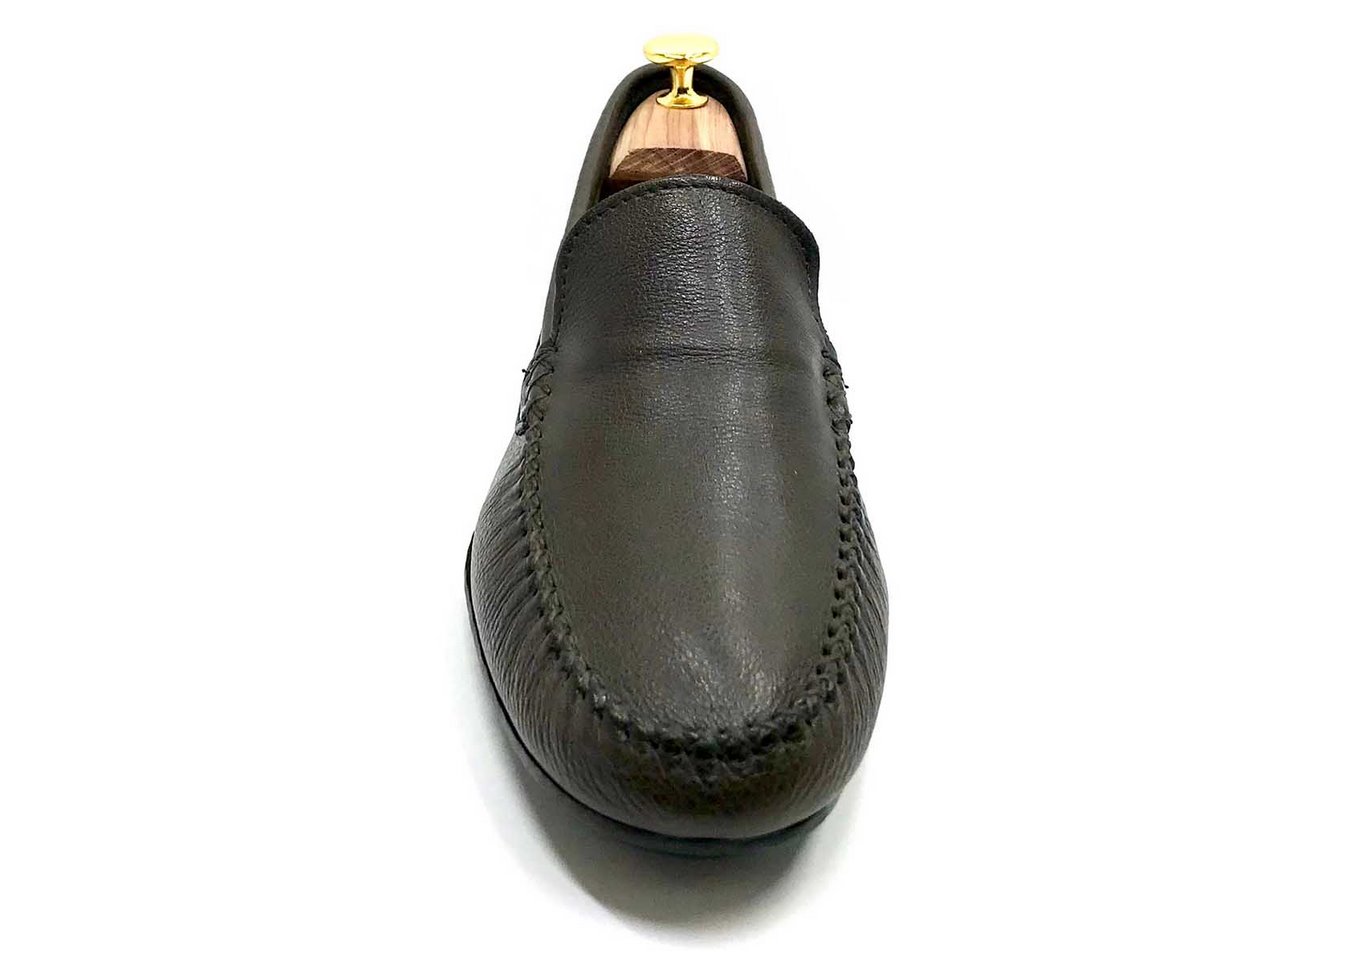 Comfort Loafer with rubber Bottom in dark Brown hammered leather